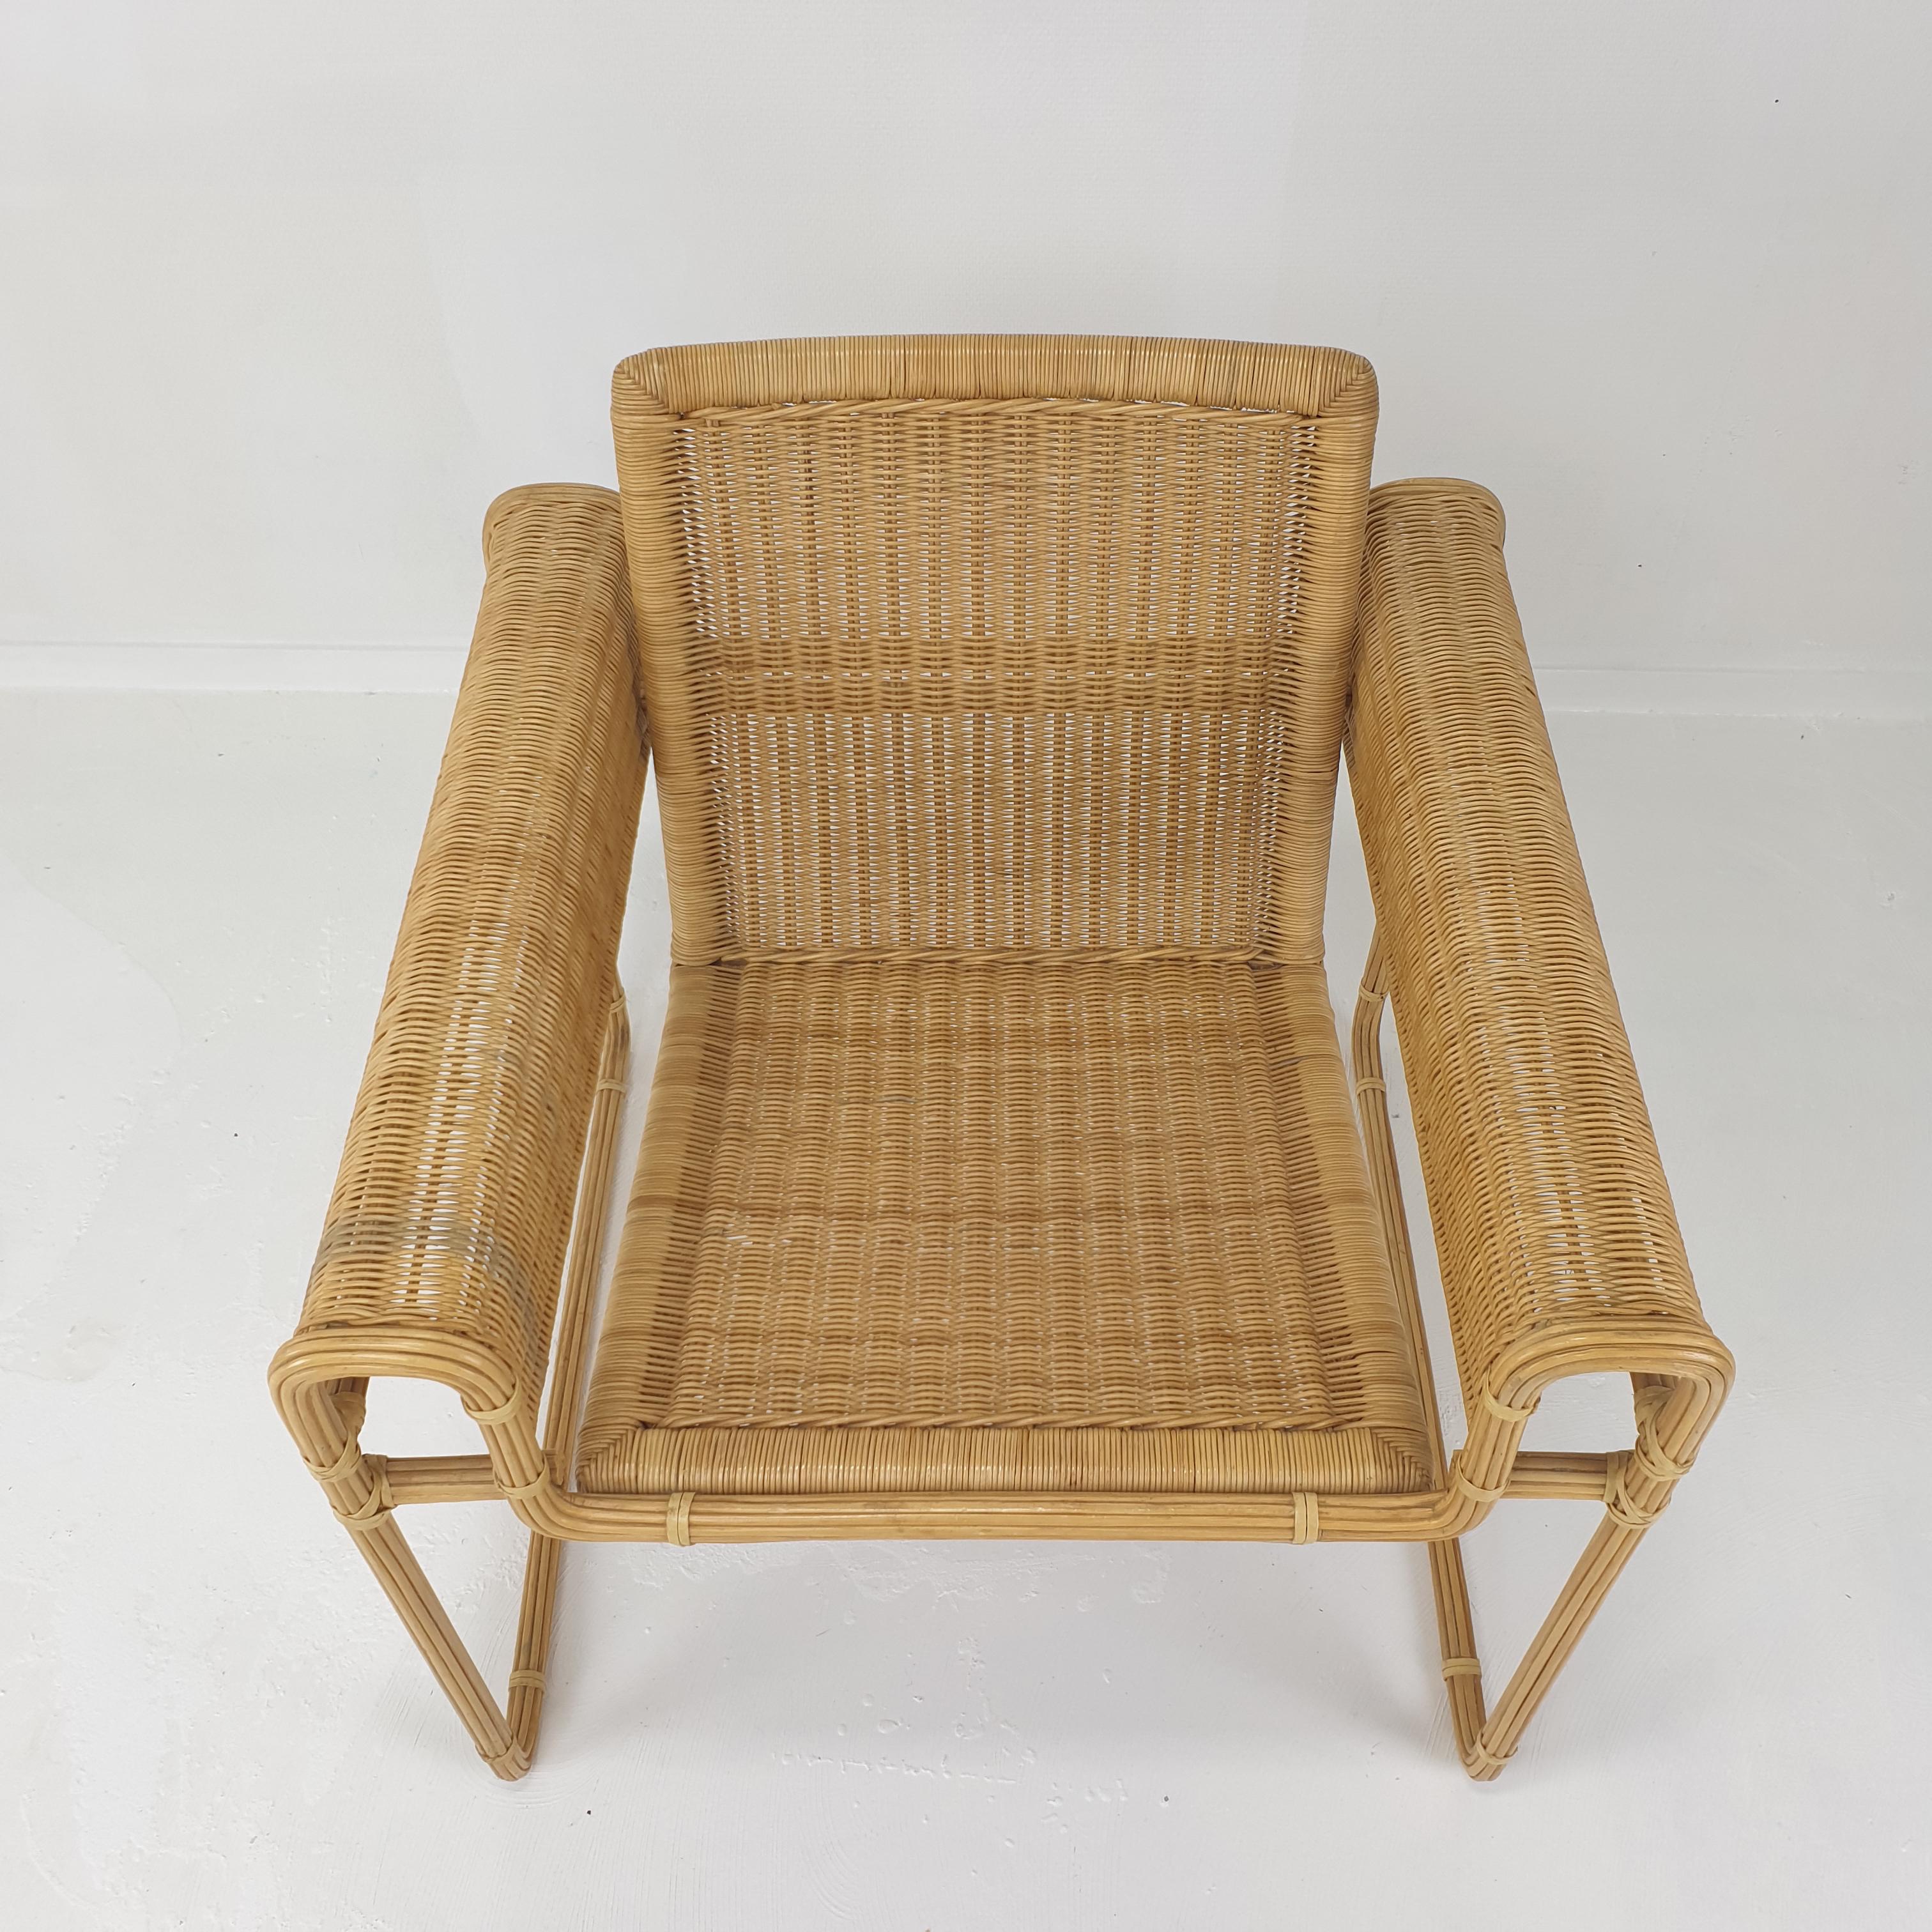 Set of 2 Dutch Wicker Chairs, 1970's For Sale 2